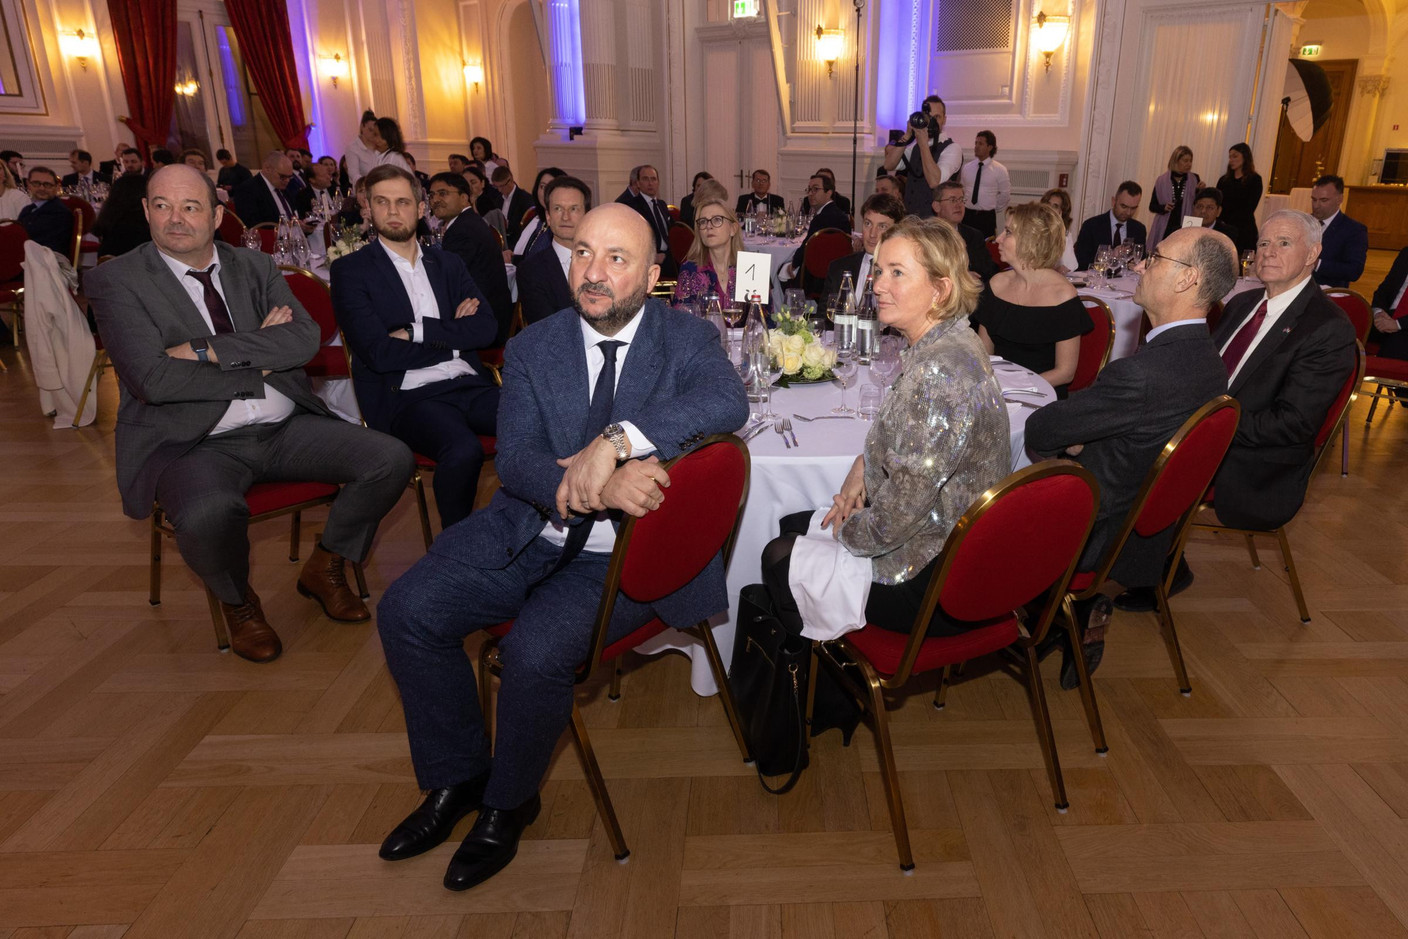 The Rapid Recovery of Ukraine gala charity dinner took place at Cercle Cité on 31 January 2023. Photo: Guy Wolff/Maison Moderne